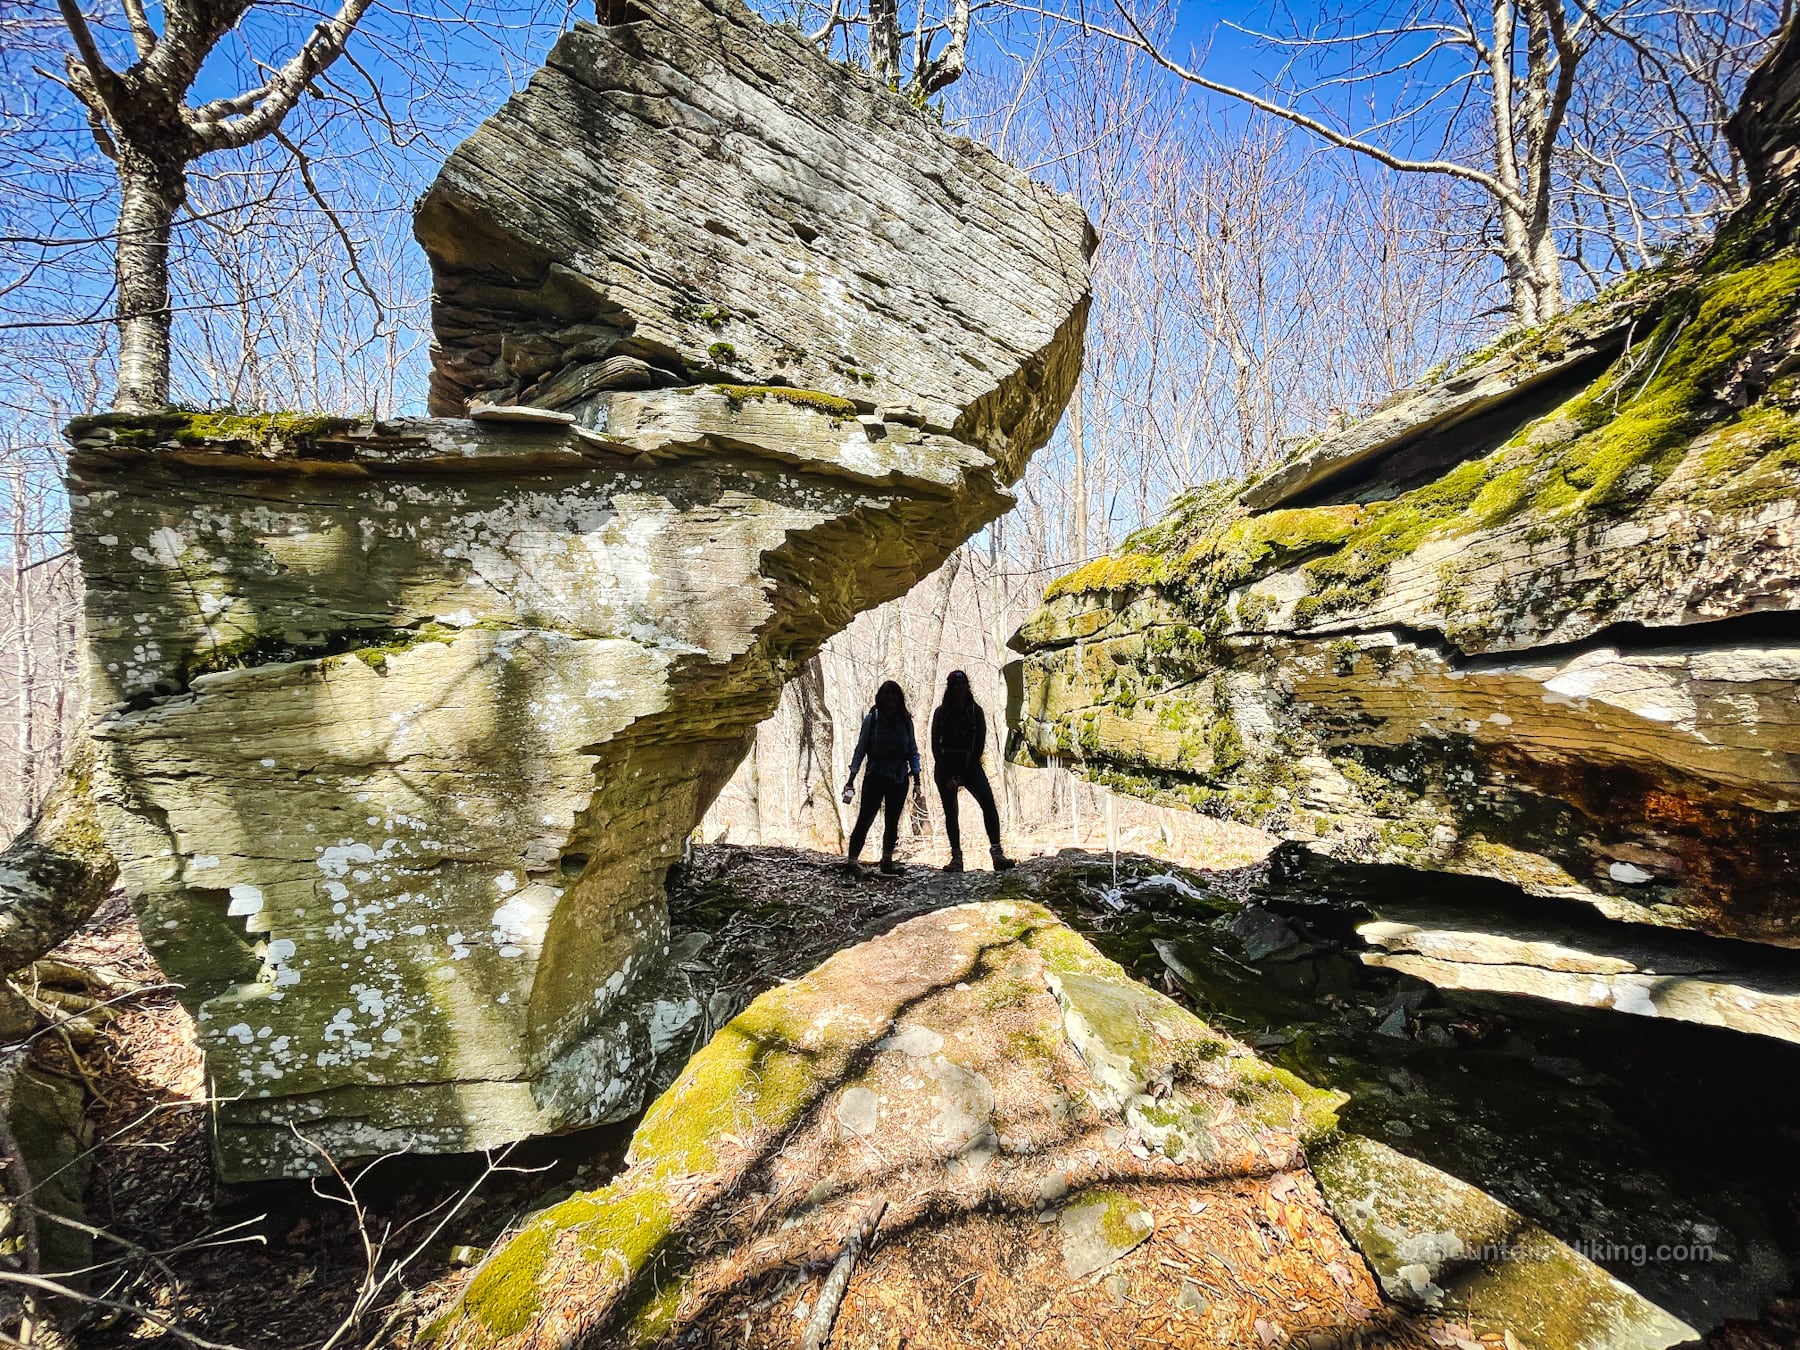 two hikers in silhouette in a rock chasm